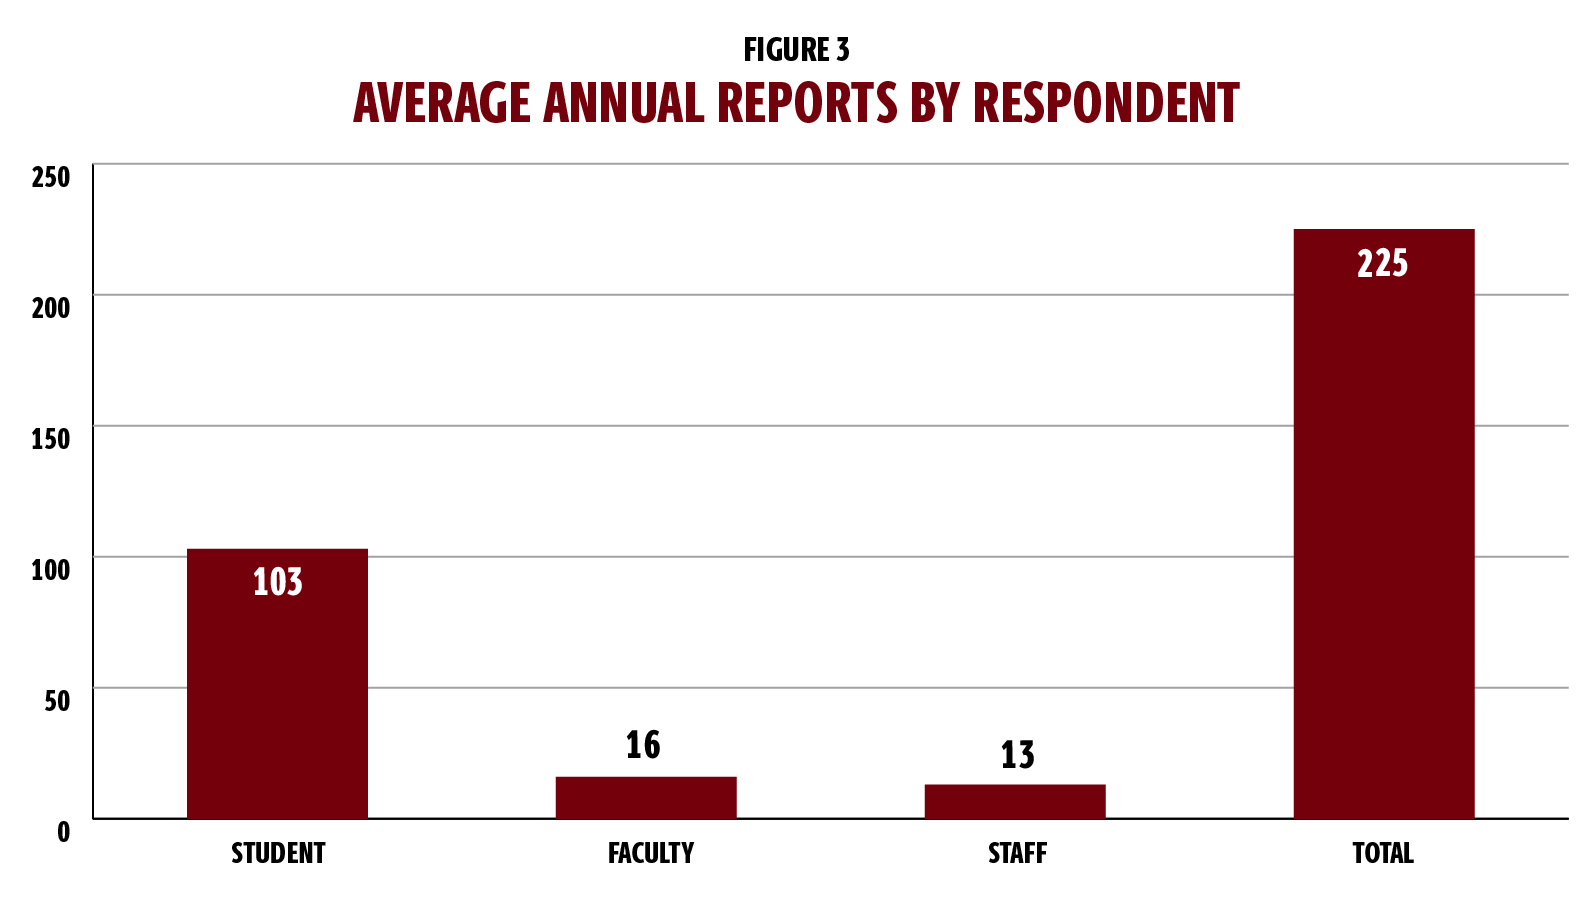 Figure 3 is a bar graph showing the average annual reports by respondent. The averages are based on data from 2016-2019. Data from 2020 were excluded because the pandemic contributed to an artificially low count. The bar graphs represent student, faculty and staff respondents, with the final bar representing the total average number of respondents. From left, the bars represent 103 student respondents; 16 faculty respondents; and 13 staff respondents. The total number is 225 respondents.